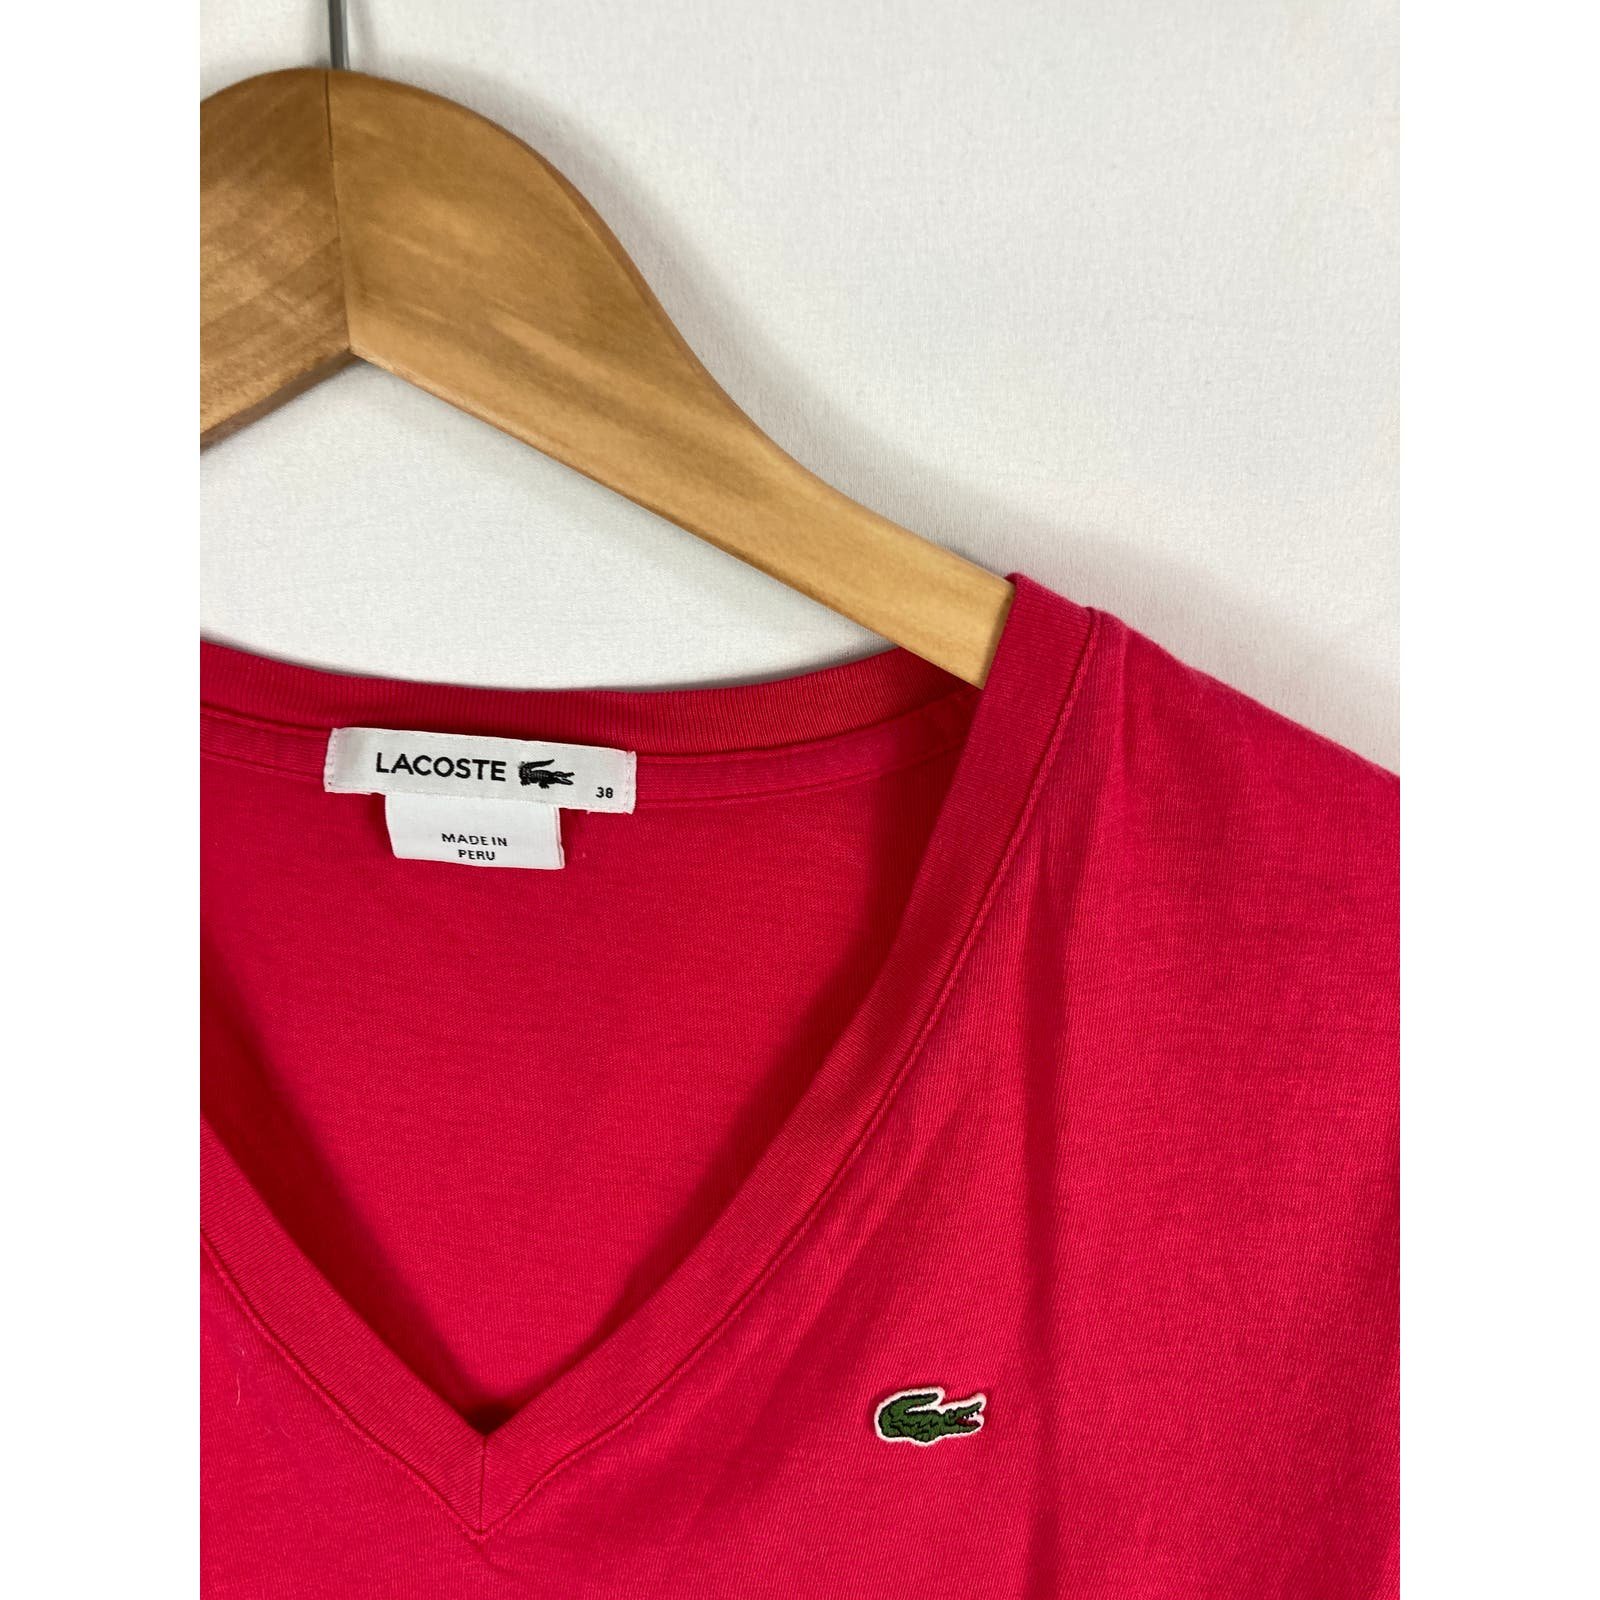 Exclusive Lacoste Pink V Neck Tshirt Size 38/Medium OB7LNvlbh no tax